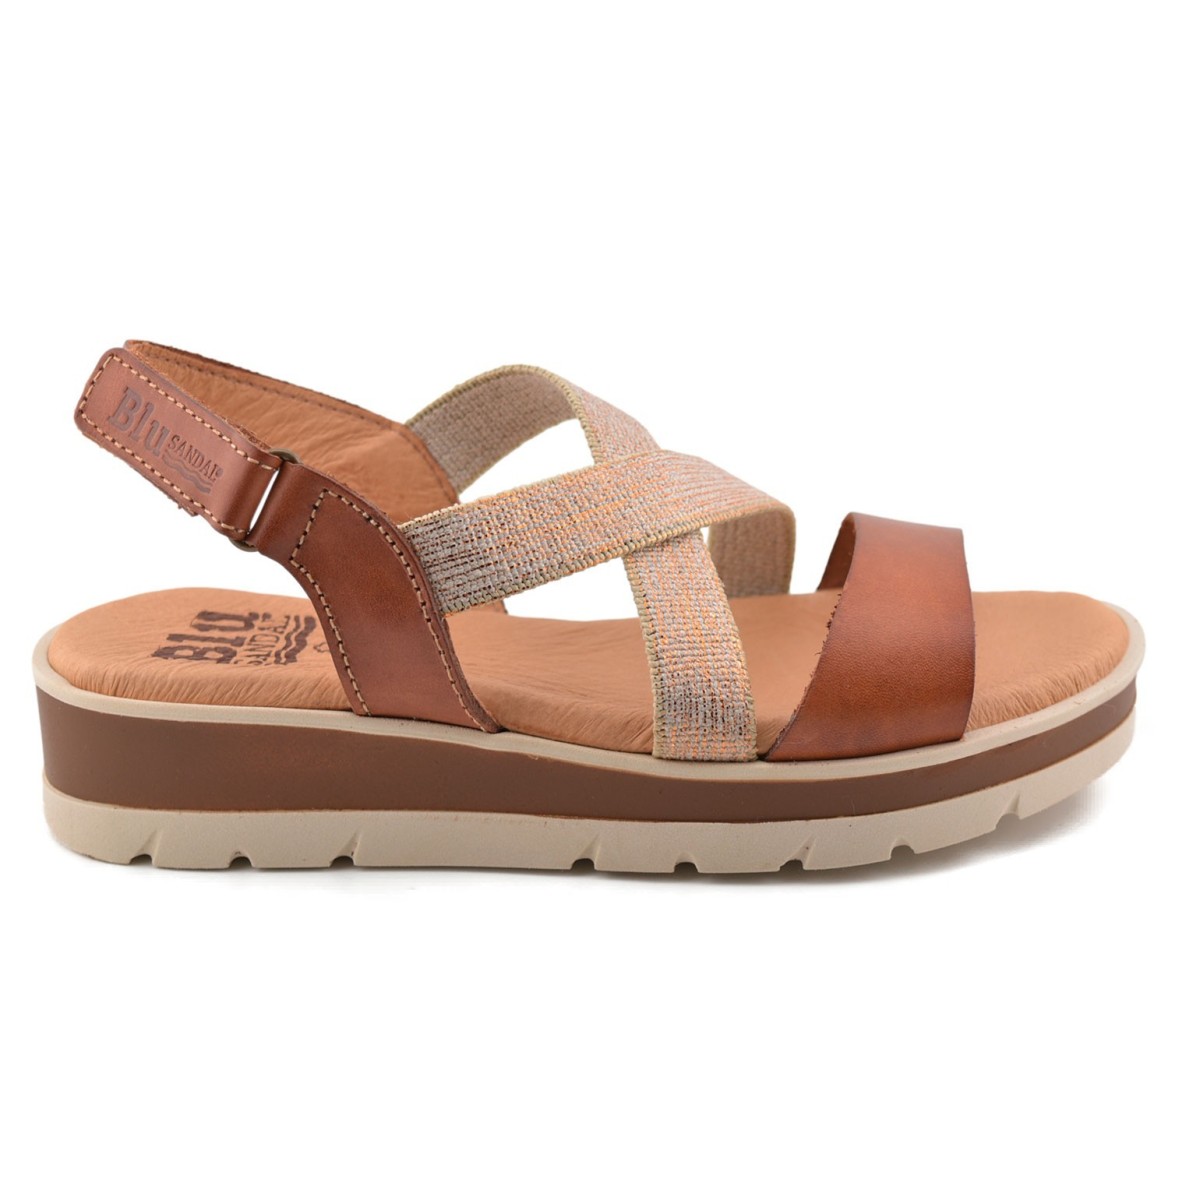 Brown Leather Sandals by Blusandal